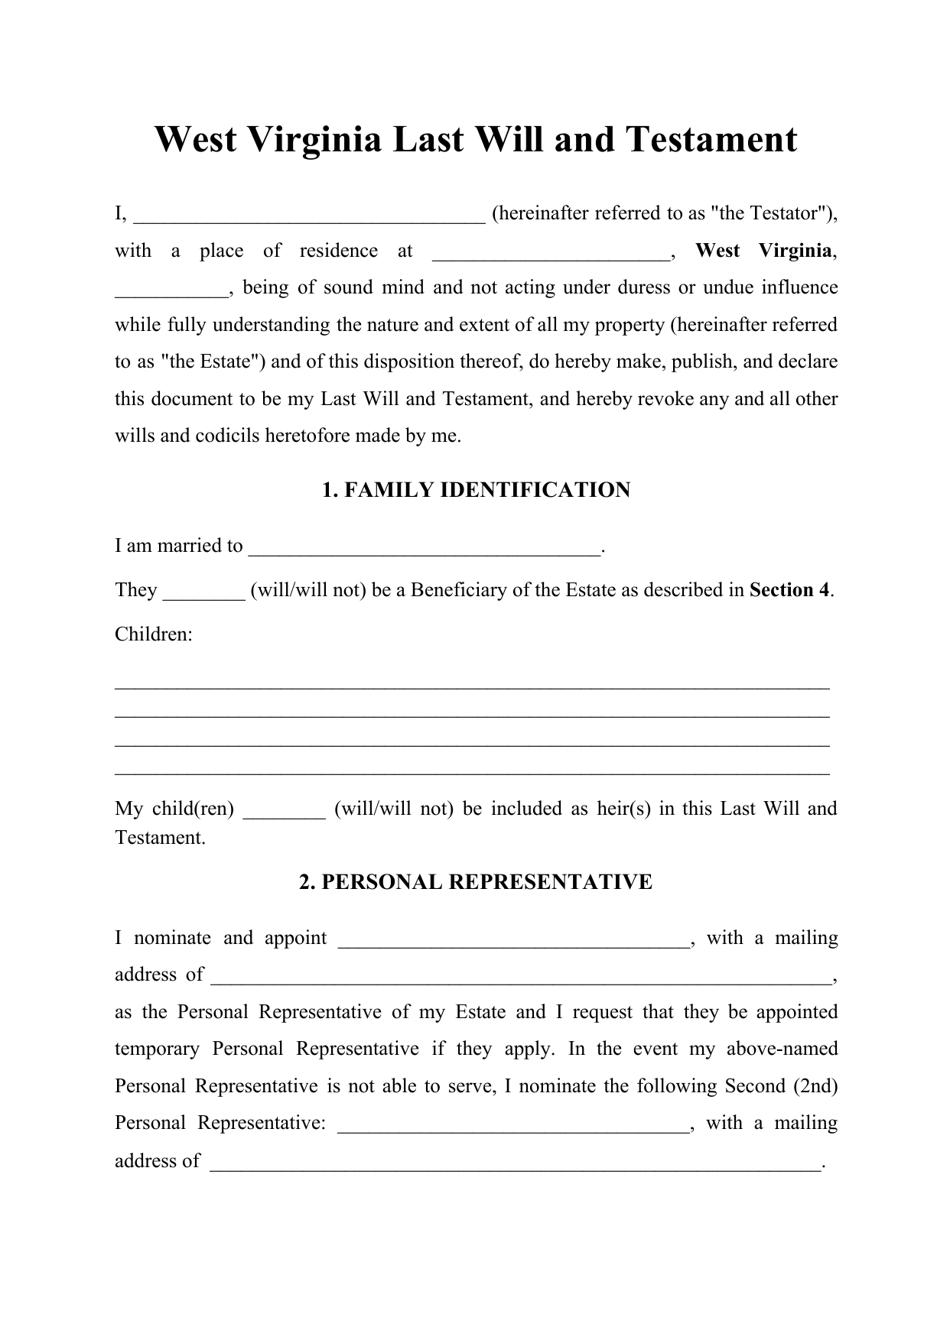 Last Will and Testament Template - West Virginia